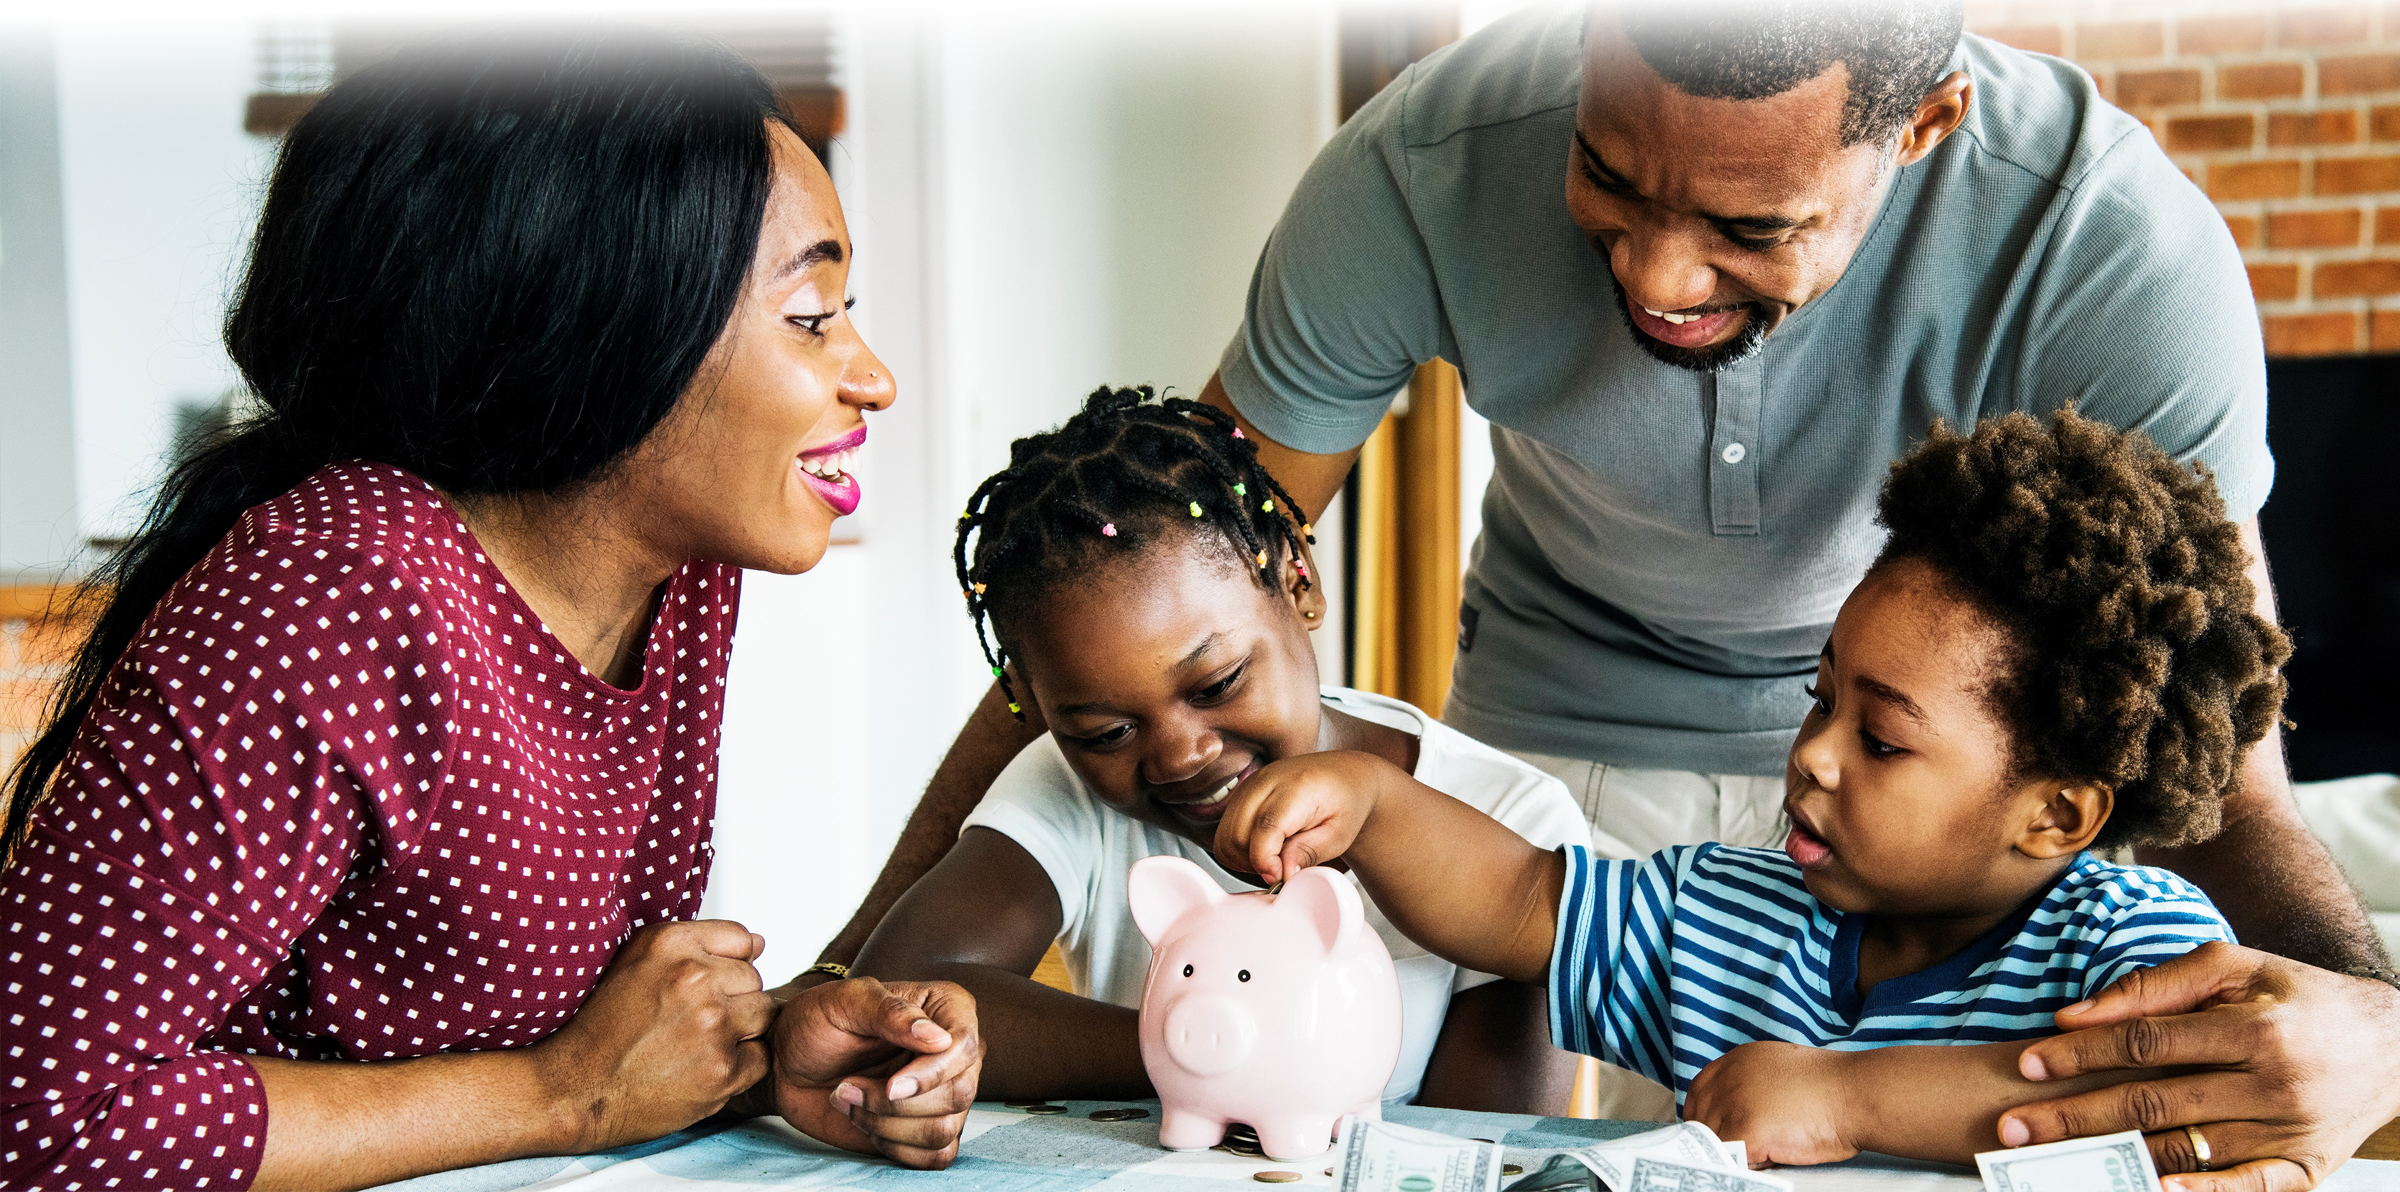 Family at dinner table with piggy bank, saving, piggy bank